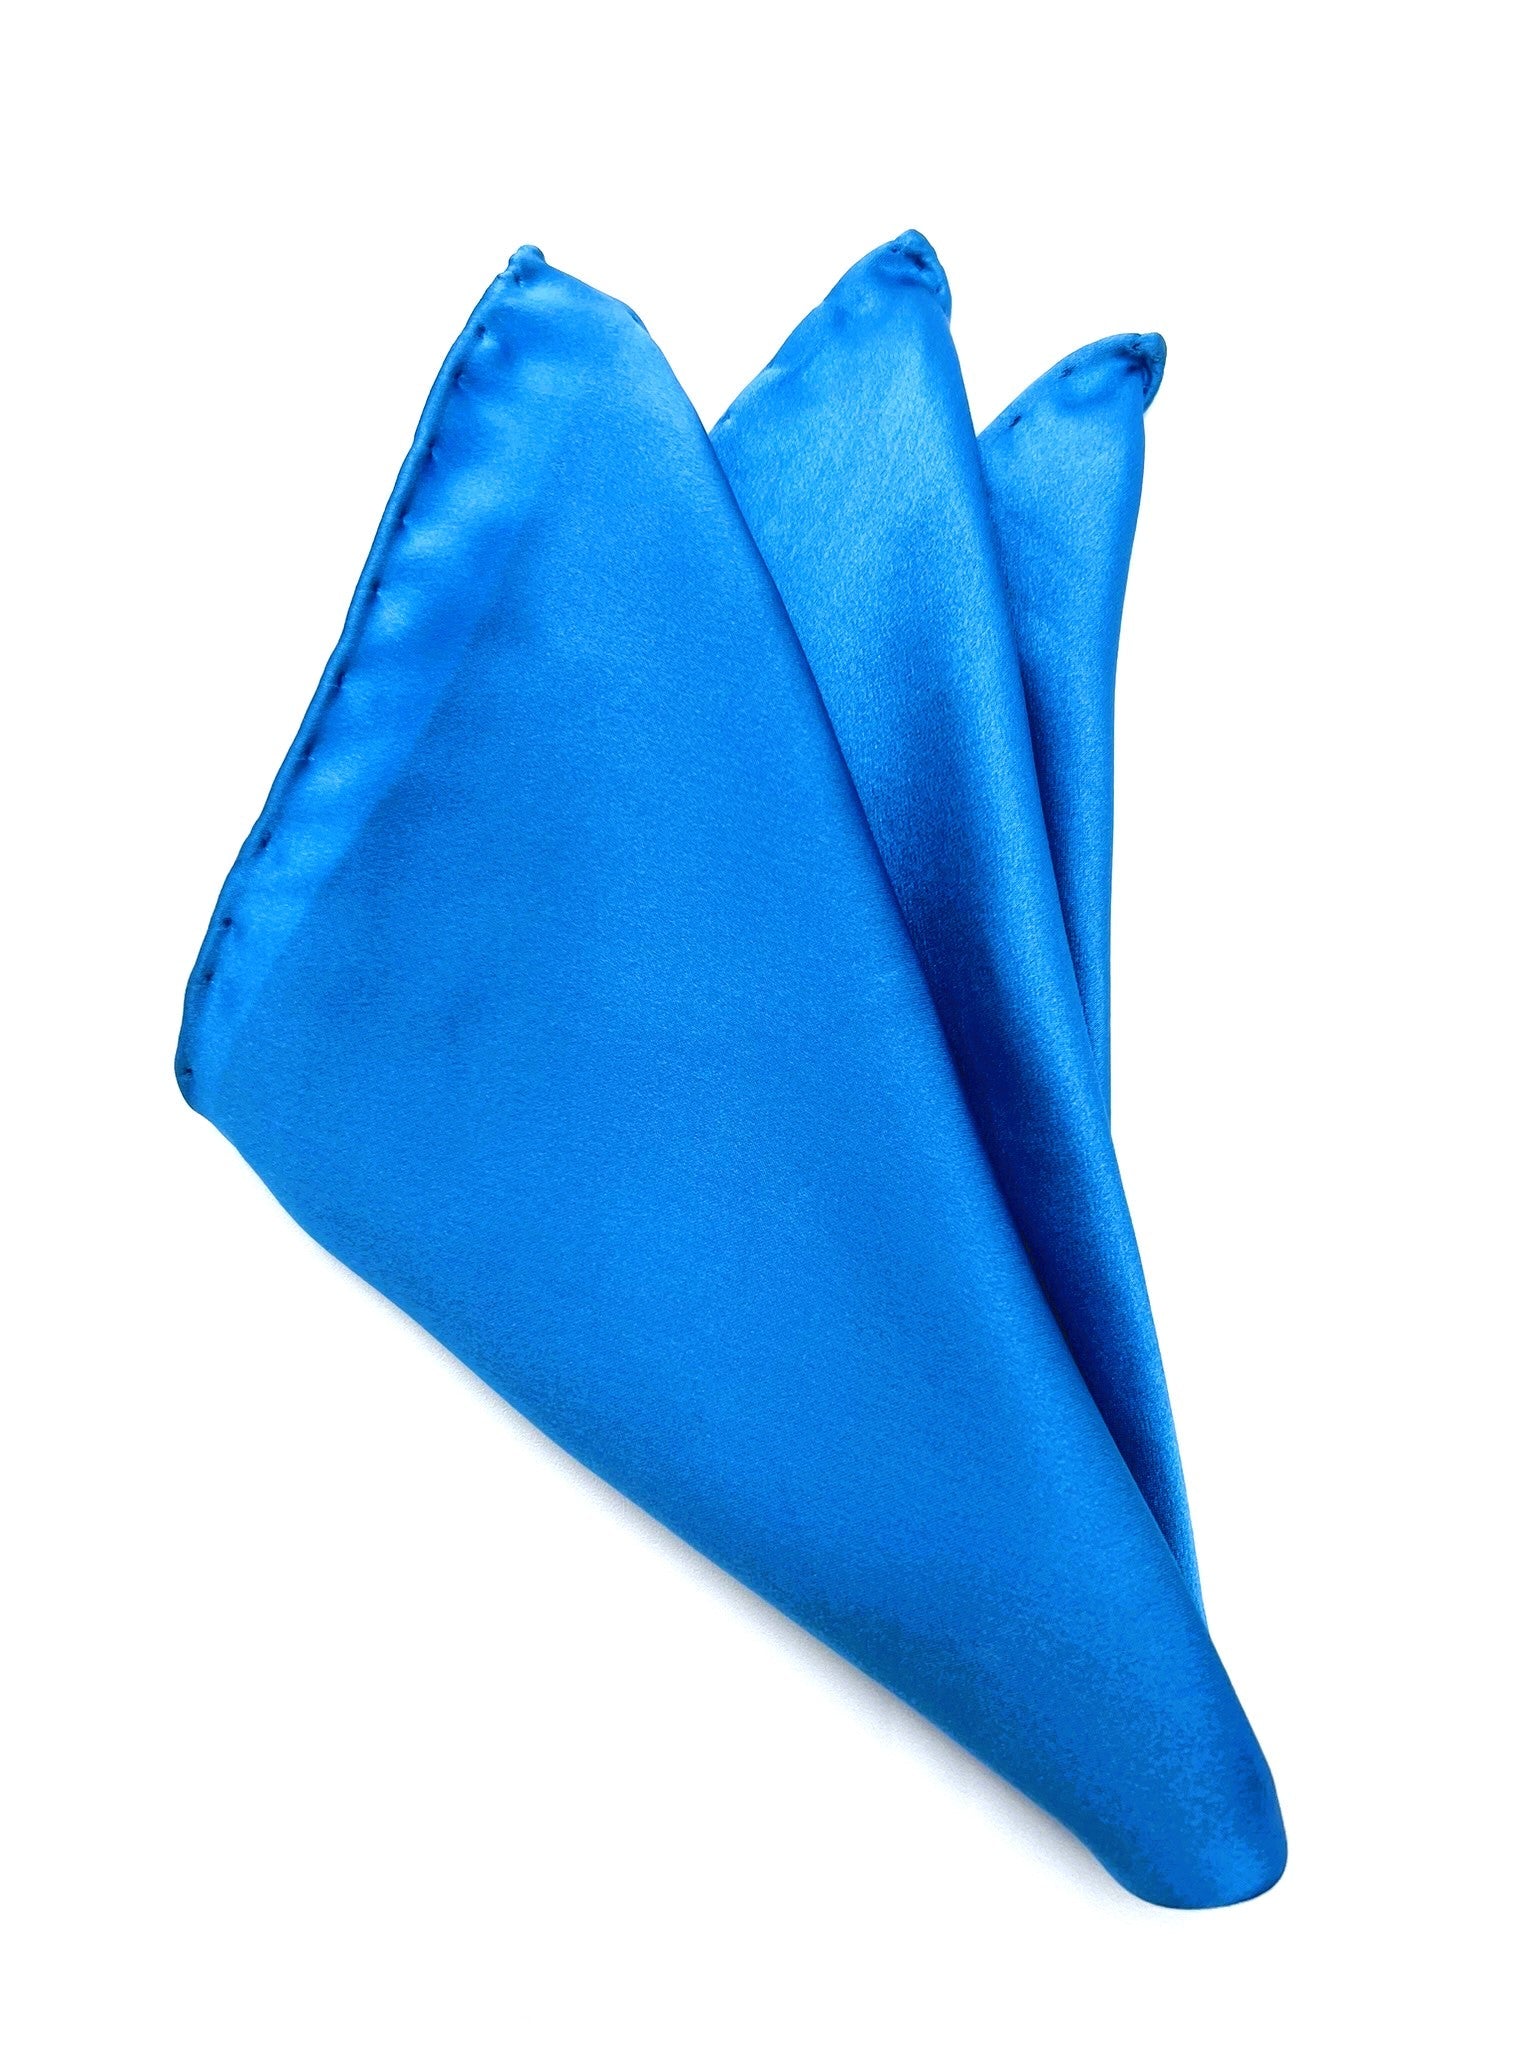 Sky Blue Silk Pocket Square. Handmade in Italy. Pocket Square in 100% pure Italian silk,  hand-finished edges. A must-have accessory for every  man&#39;s wardrobe that can suit either  a classic or sophisticated look.| Sartoria Dei Duchi - Atri